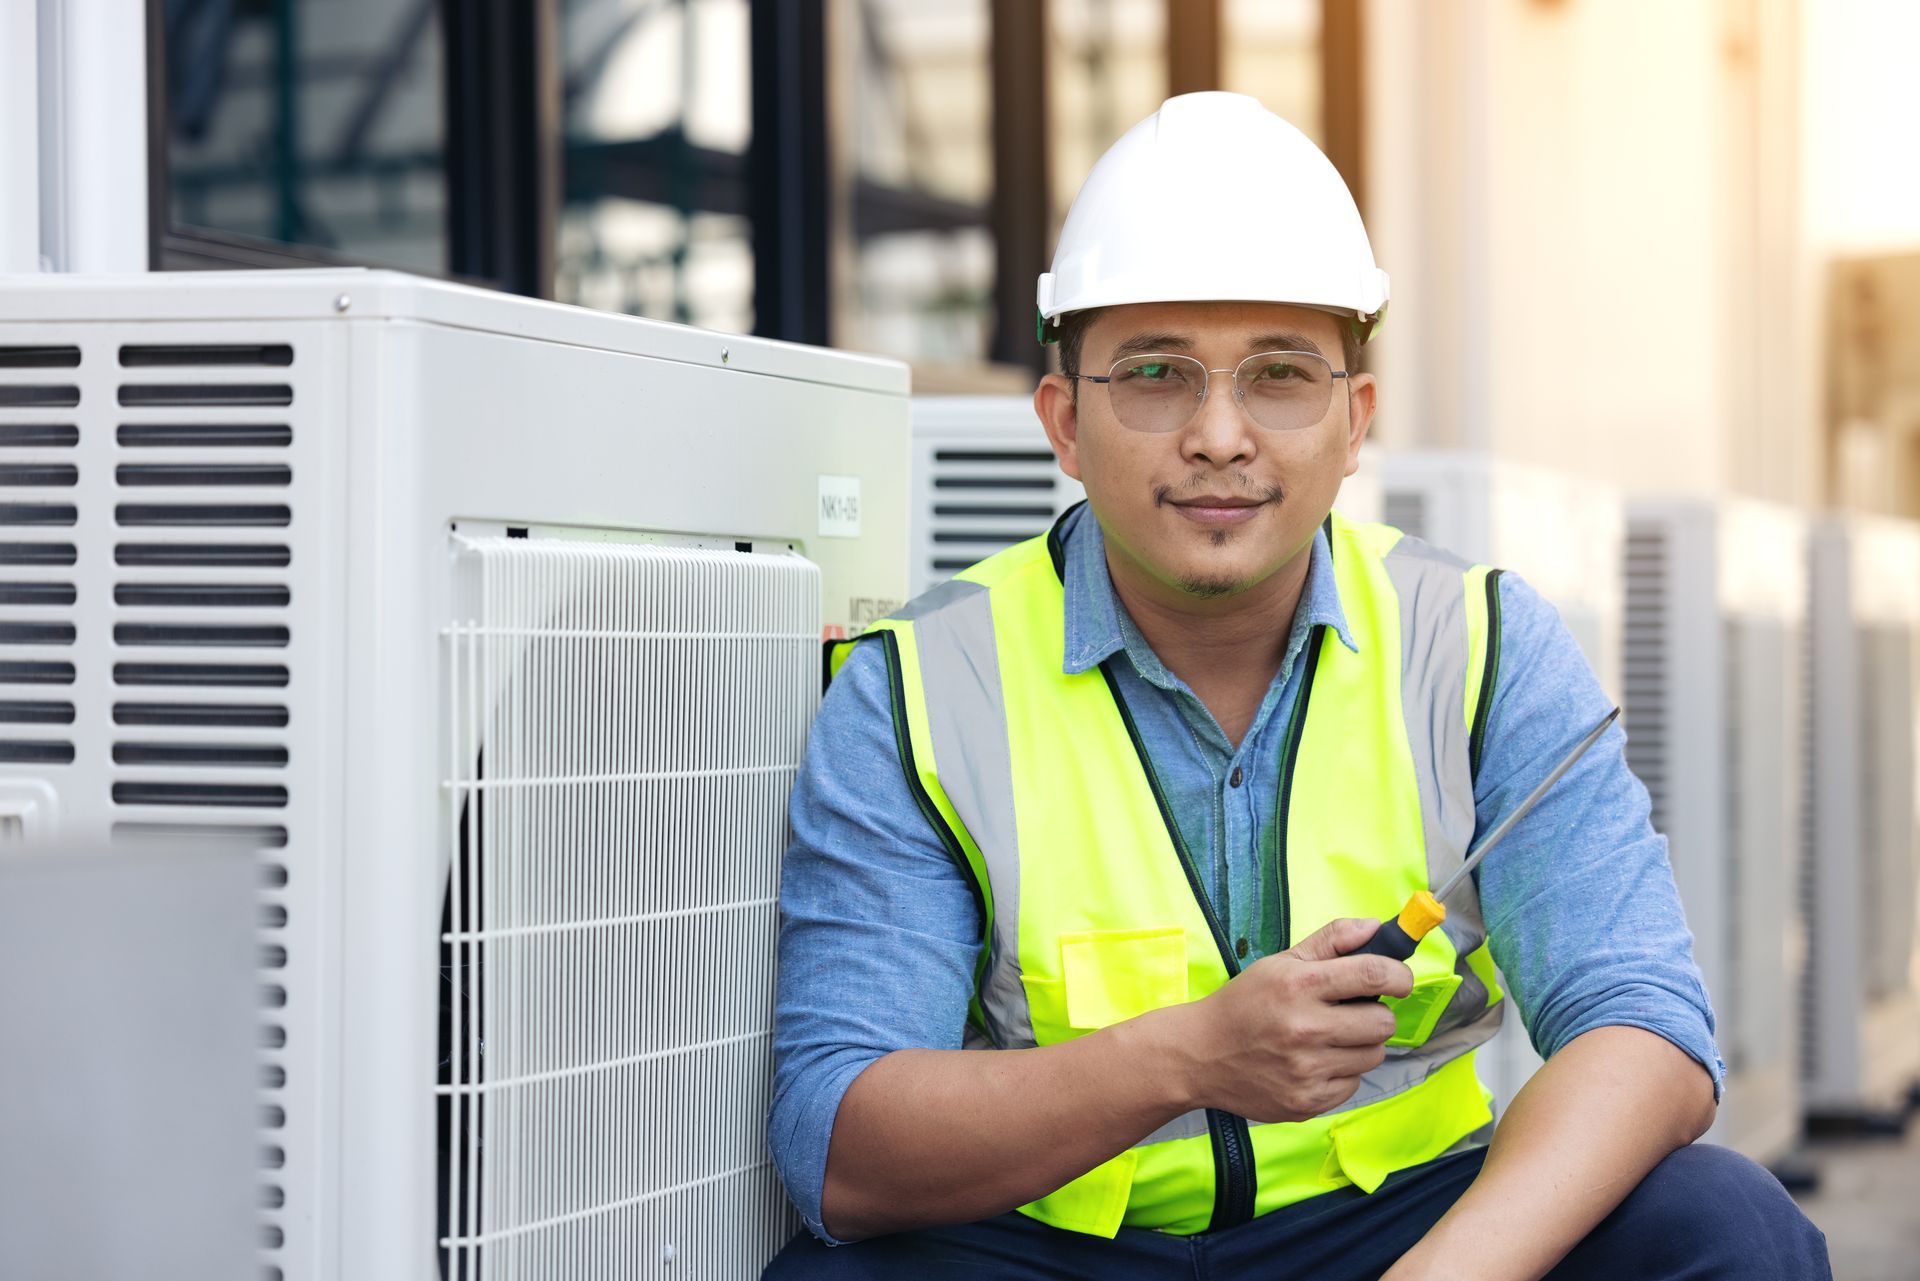 A man wearing a hard hat and safety vest is sitting next to an air conditioner.